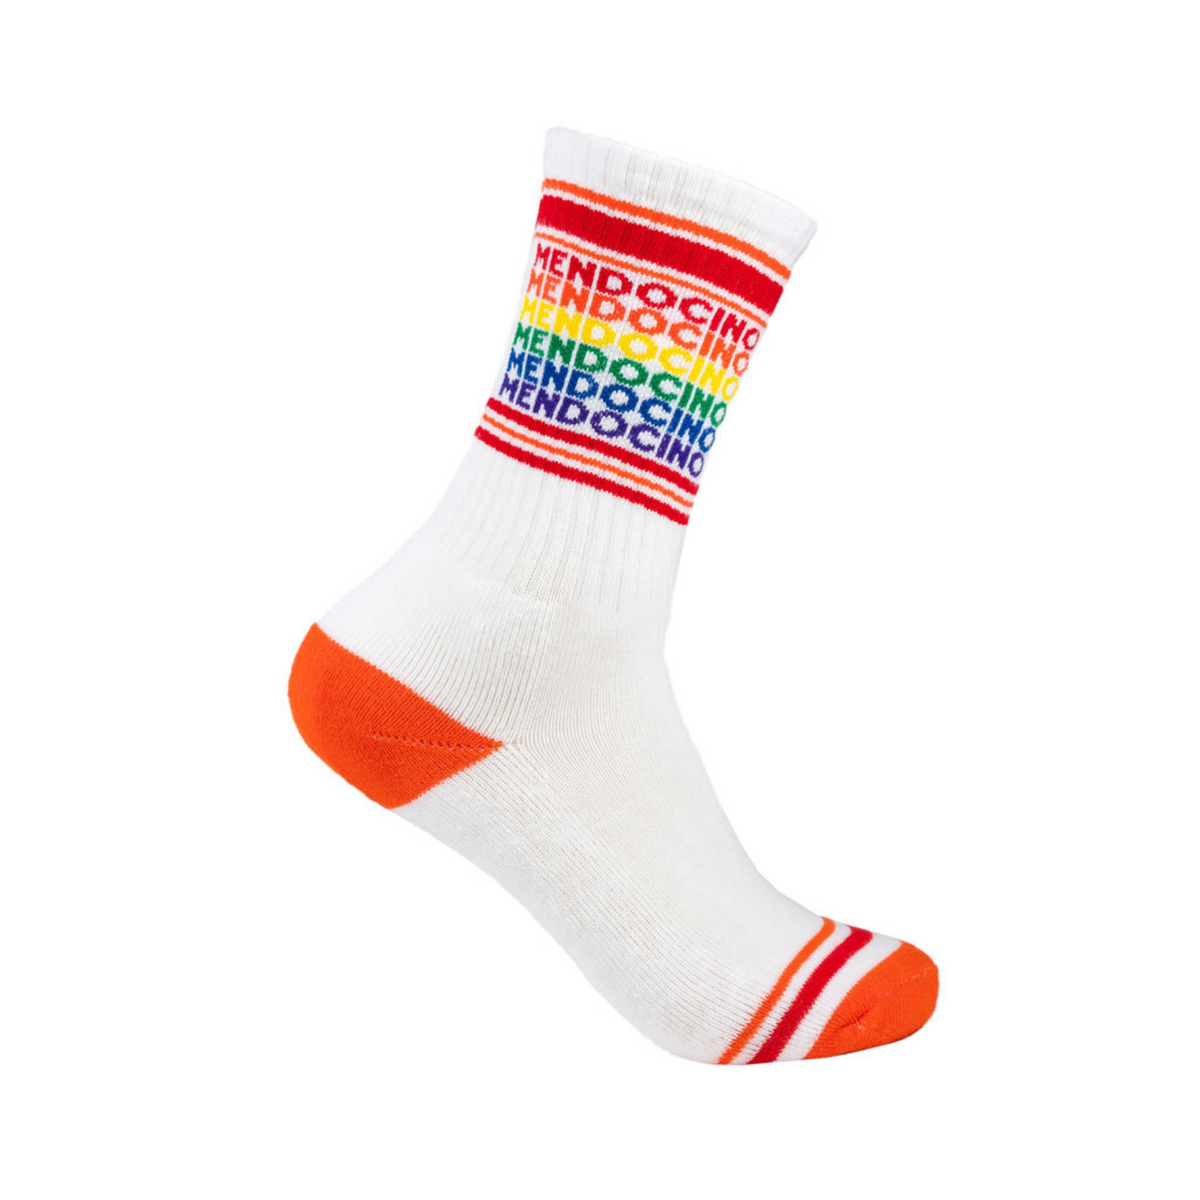 Gumball Poodle Mendocino women&#39;s and men&#39;s sock featuring &quot;Mendocino&quot; in rainbow colors on white sock on display foot